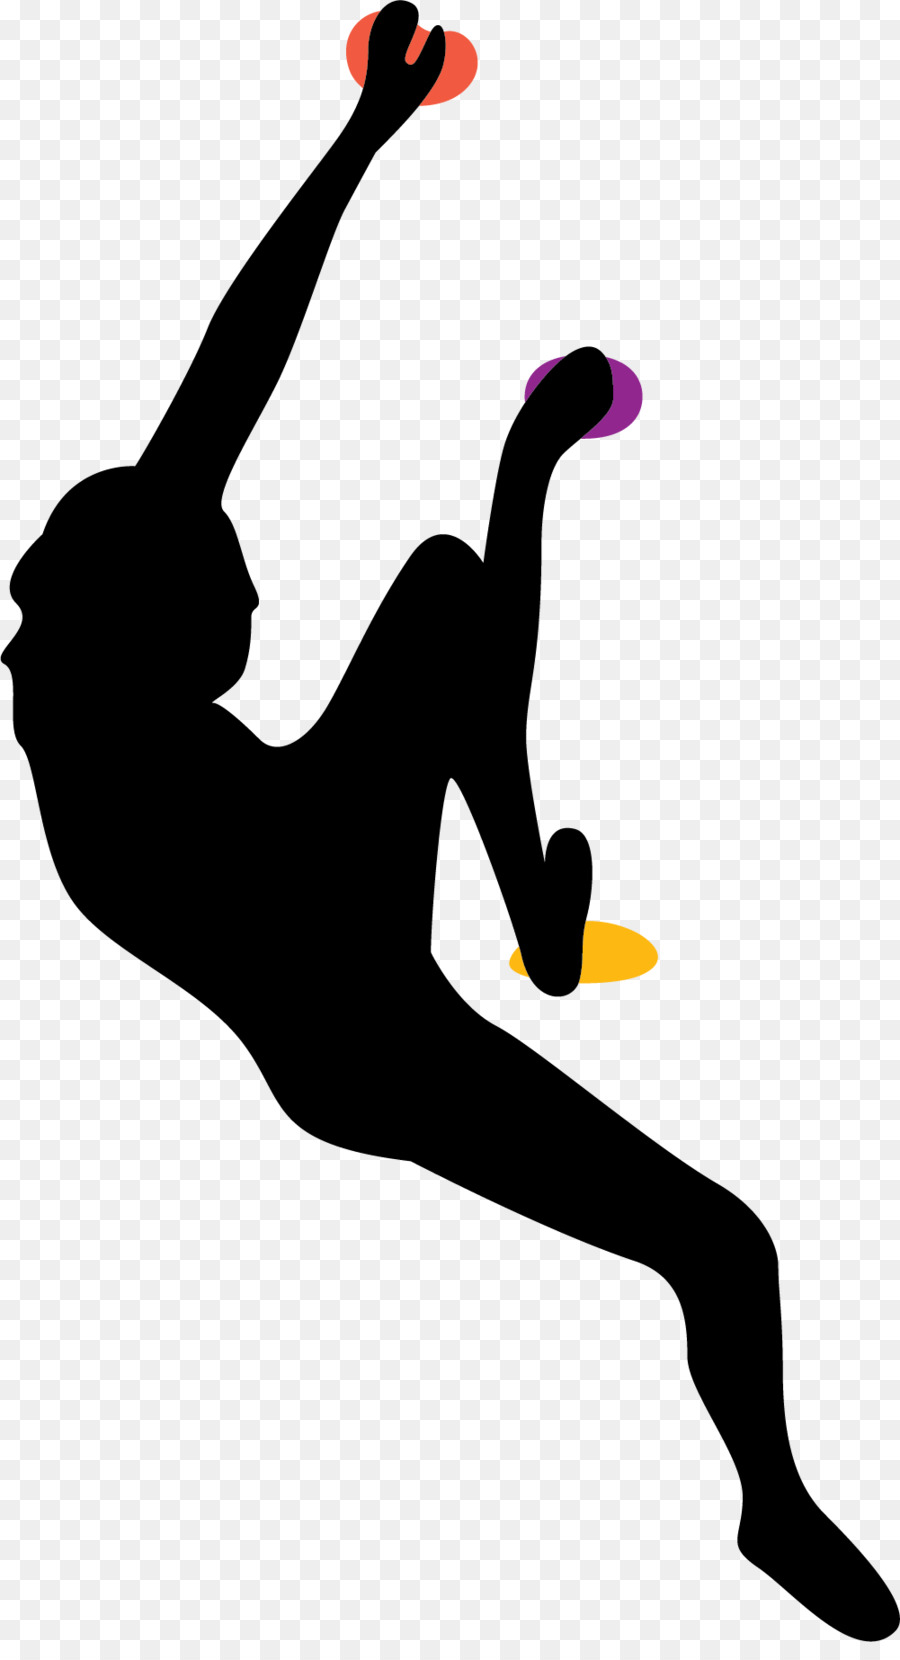 Climbing Silhouette Illustration - Rock climbing equipment png download - 1001*1826 - Free Transparent Climbing png Download.